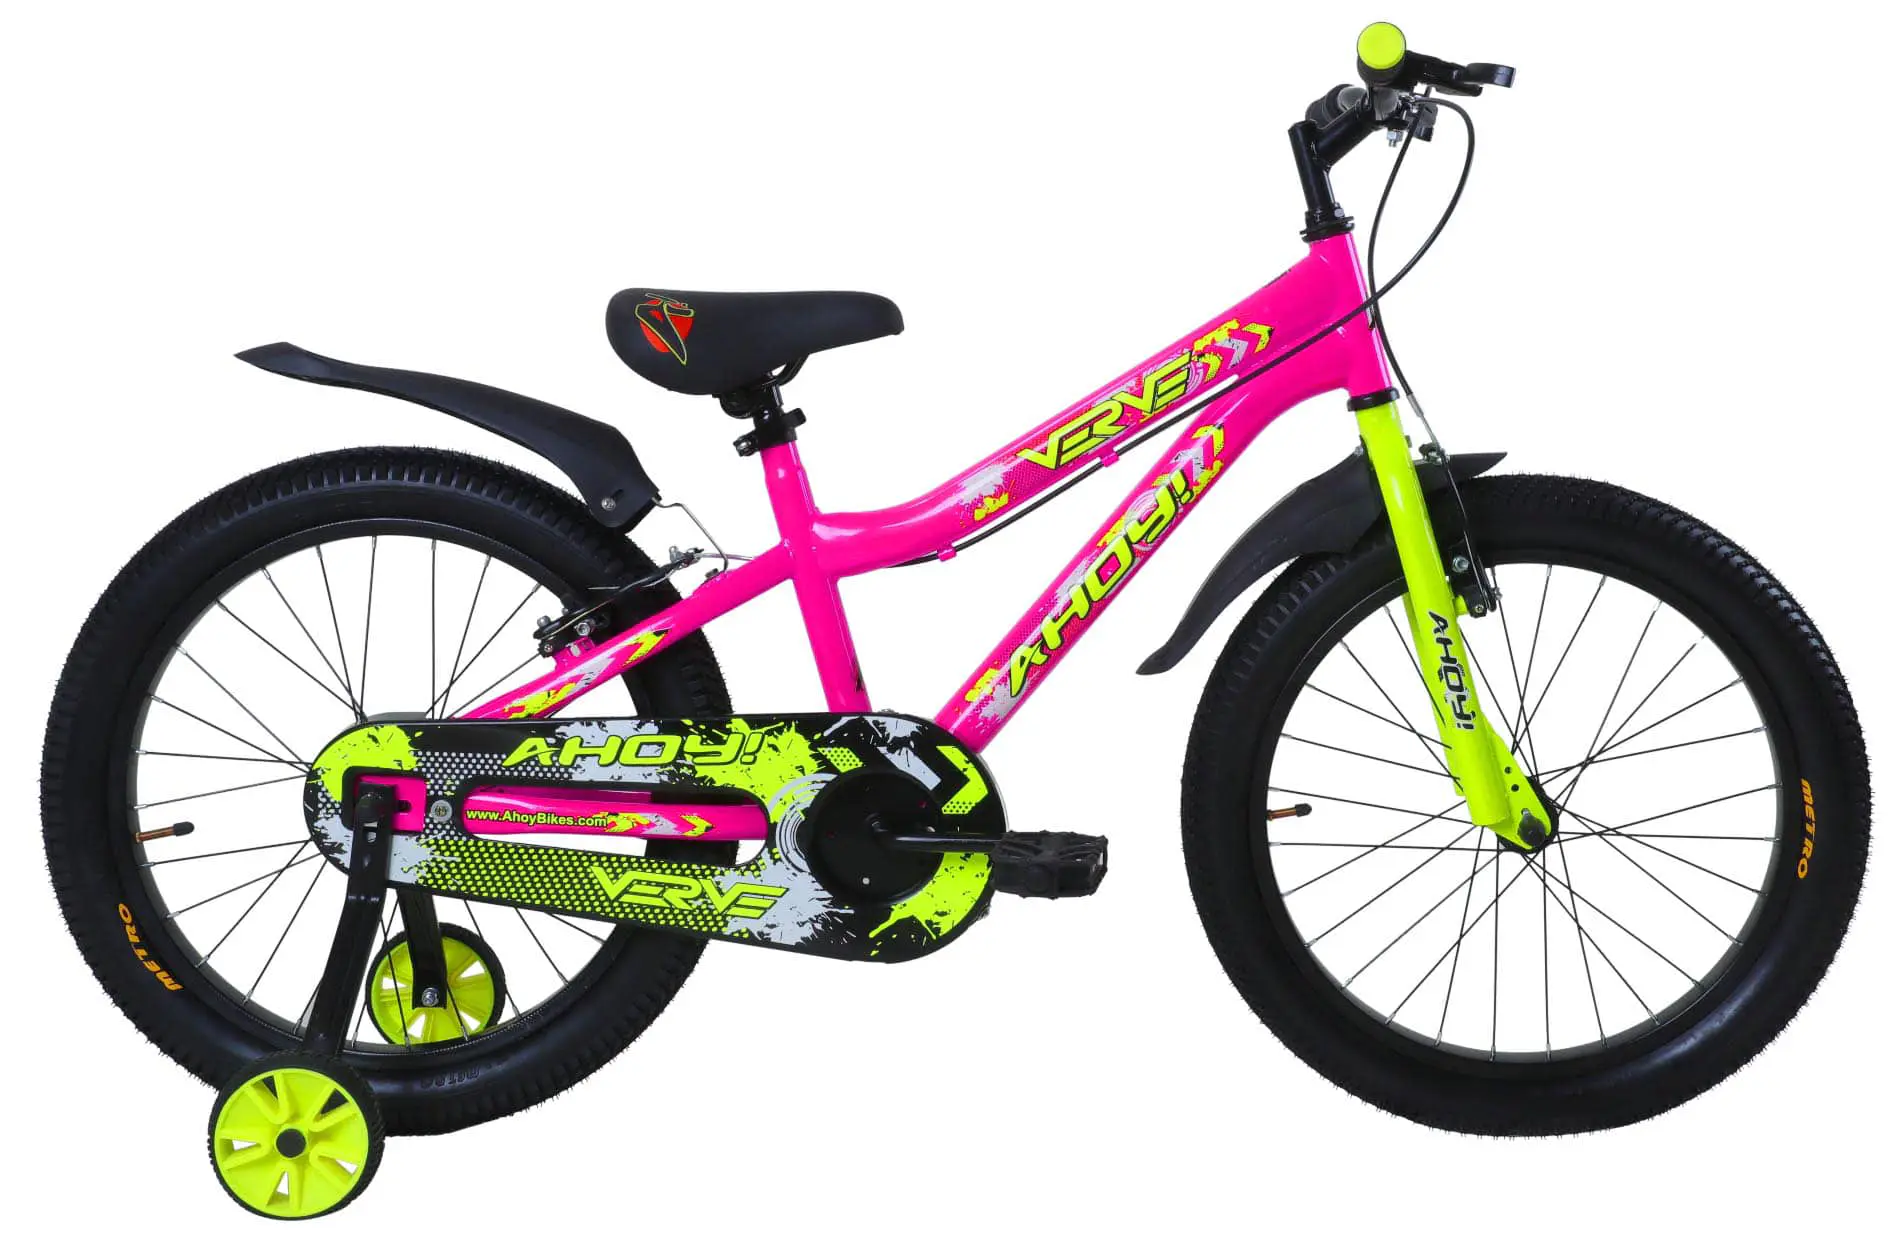 Verve Girls Bike Single Speed 20T | Buy Pink Cycle Non Gear for Kids